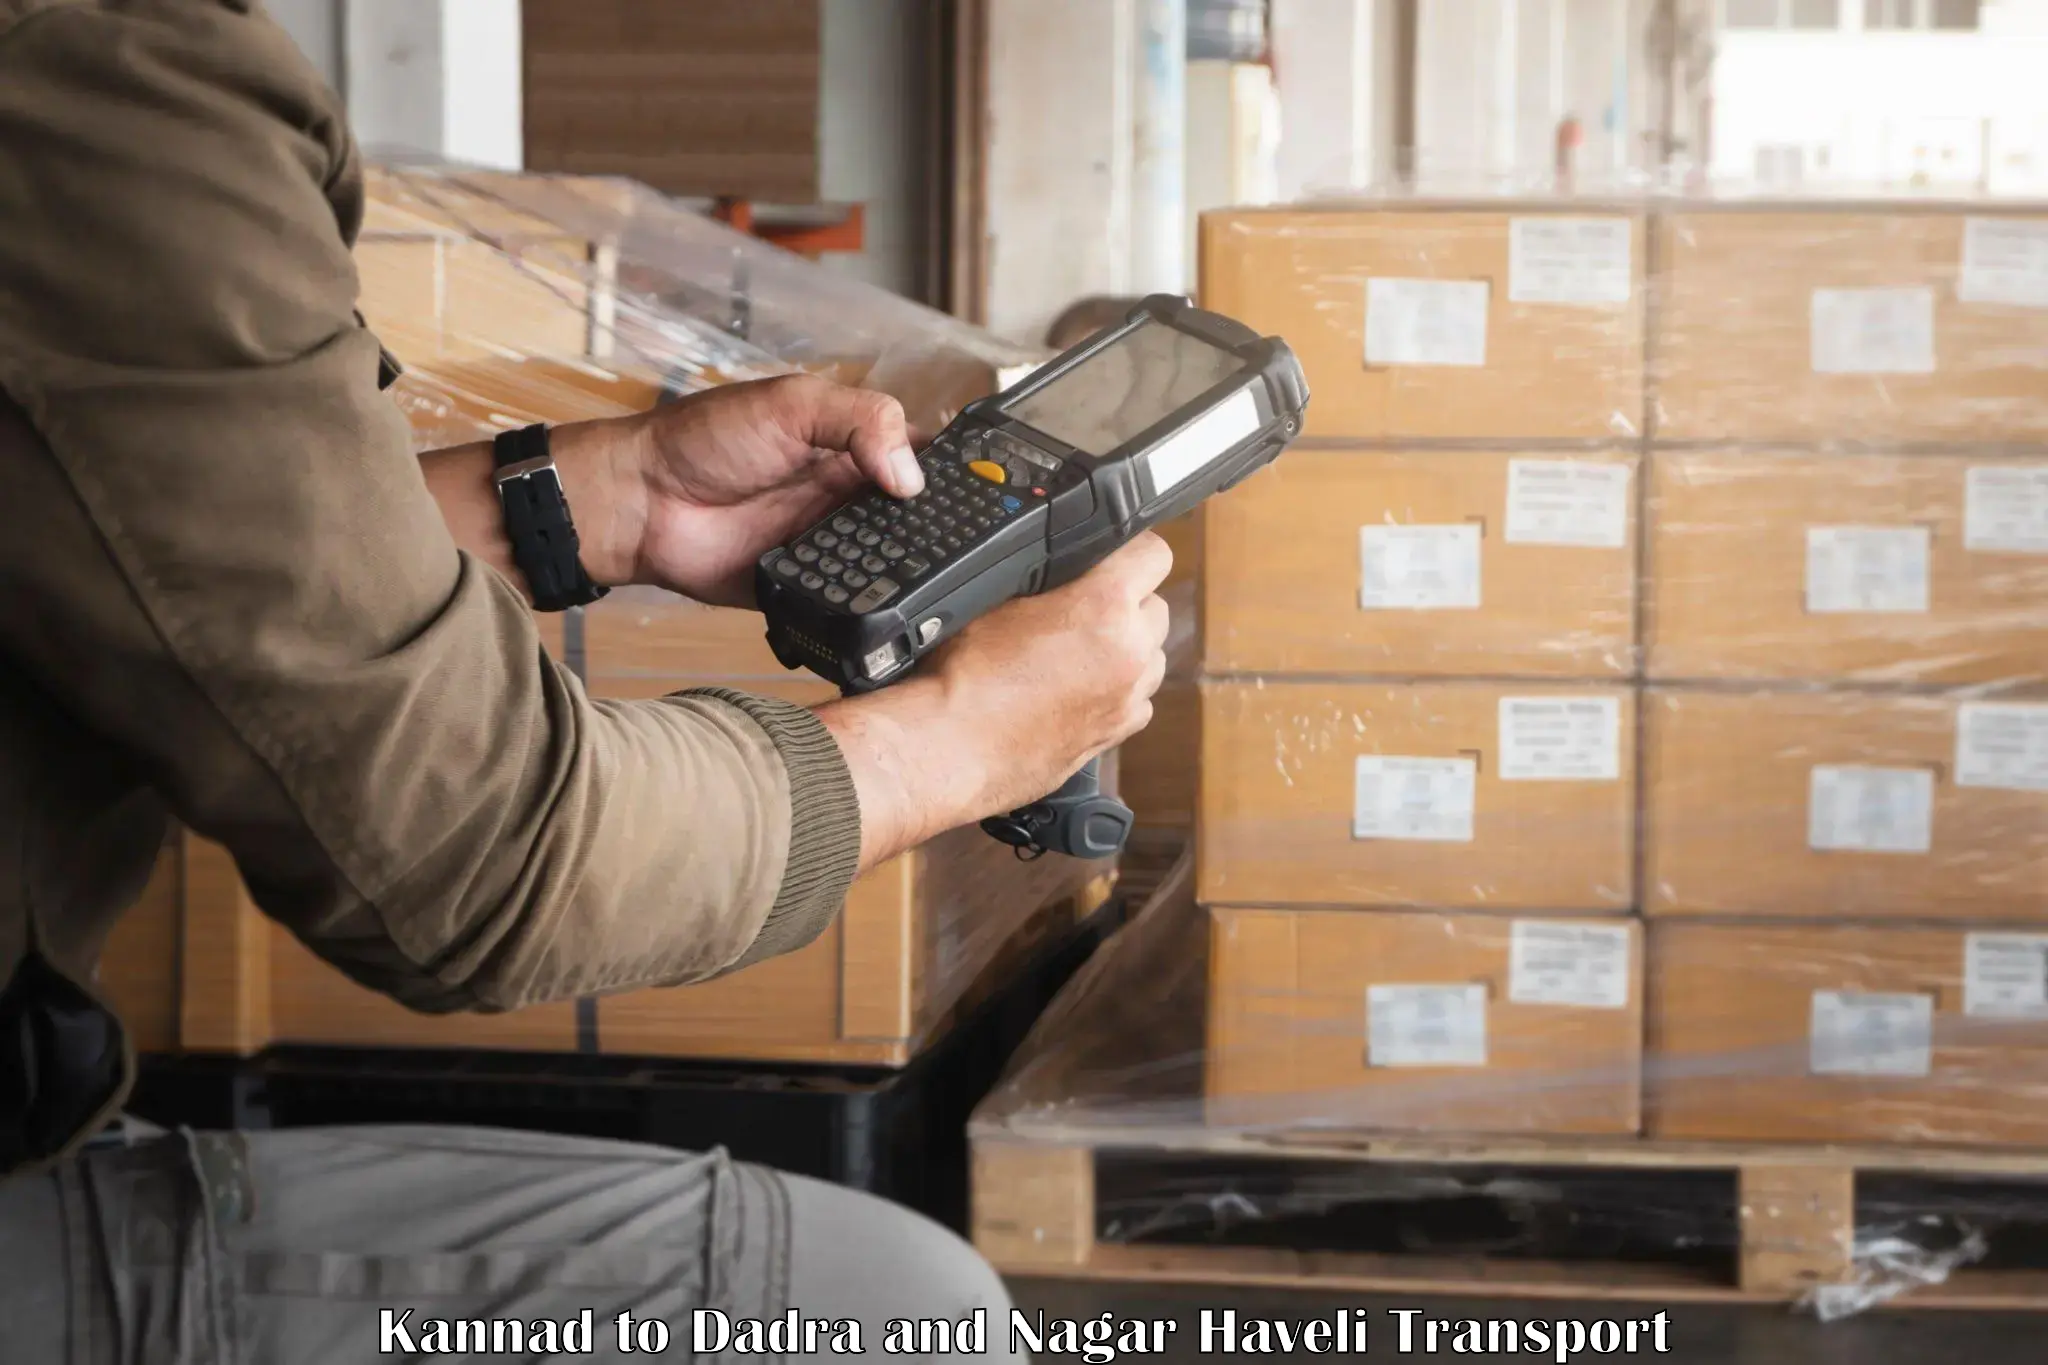 Domestic goods transportation services in Kannad to Dadra and Nagar Haveli